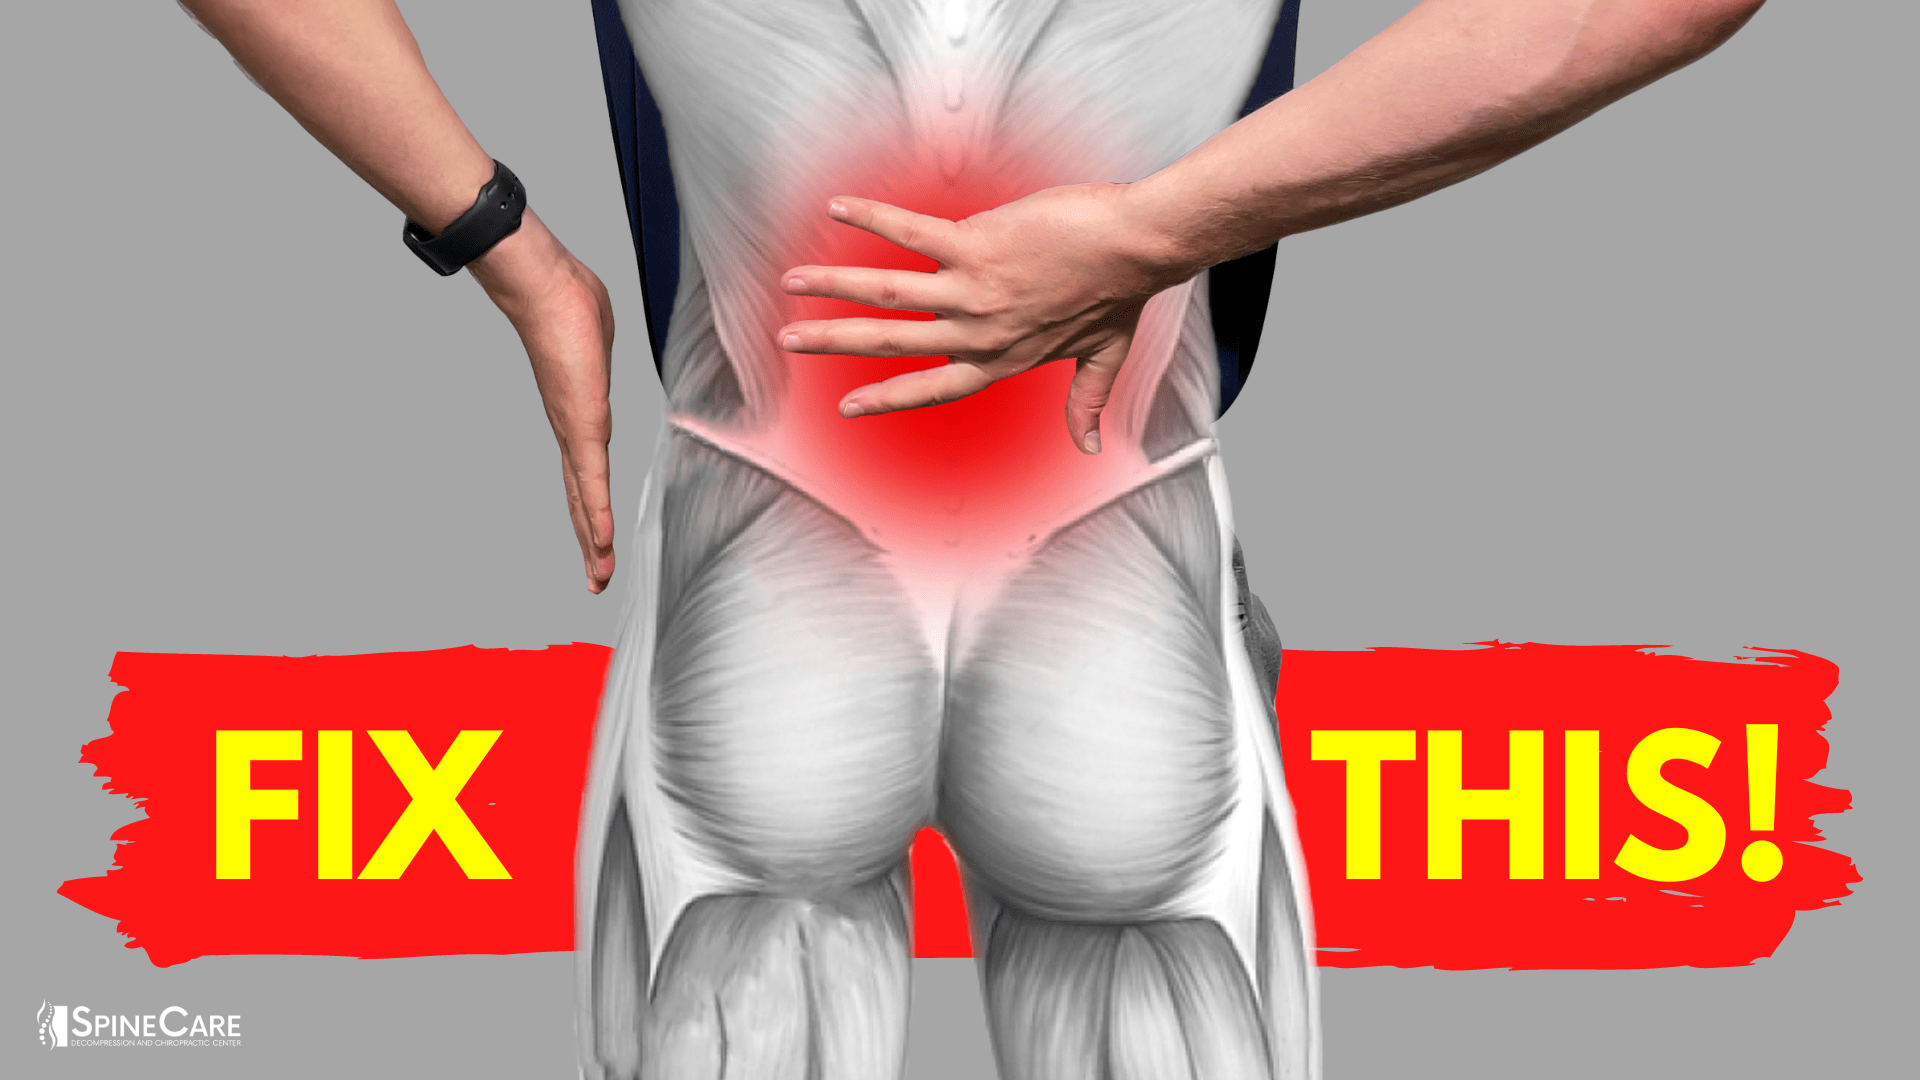 How to Fix Lower Back Strain Pain in 30 SECONDS | SpineCare | St. Joseph, Michigan Chiropractor